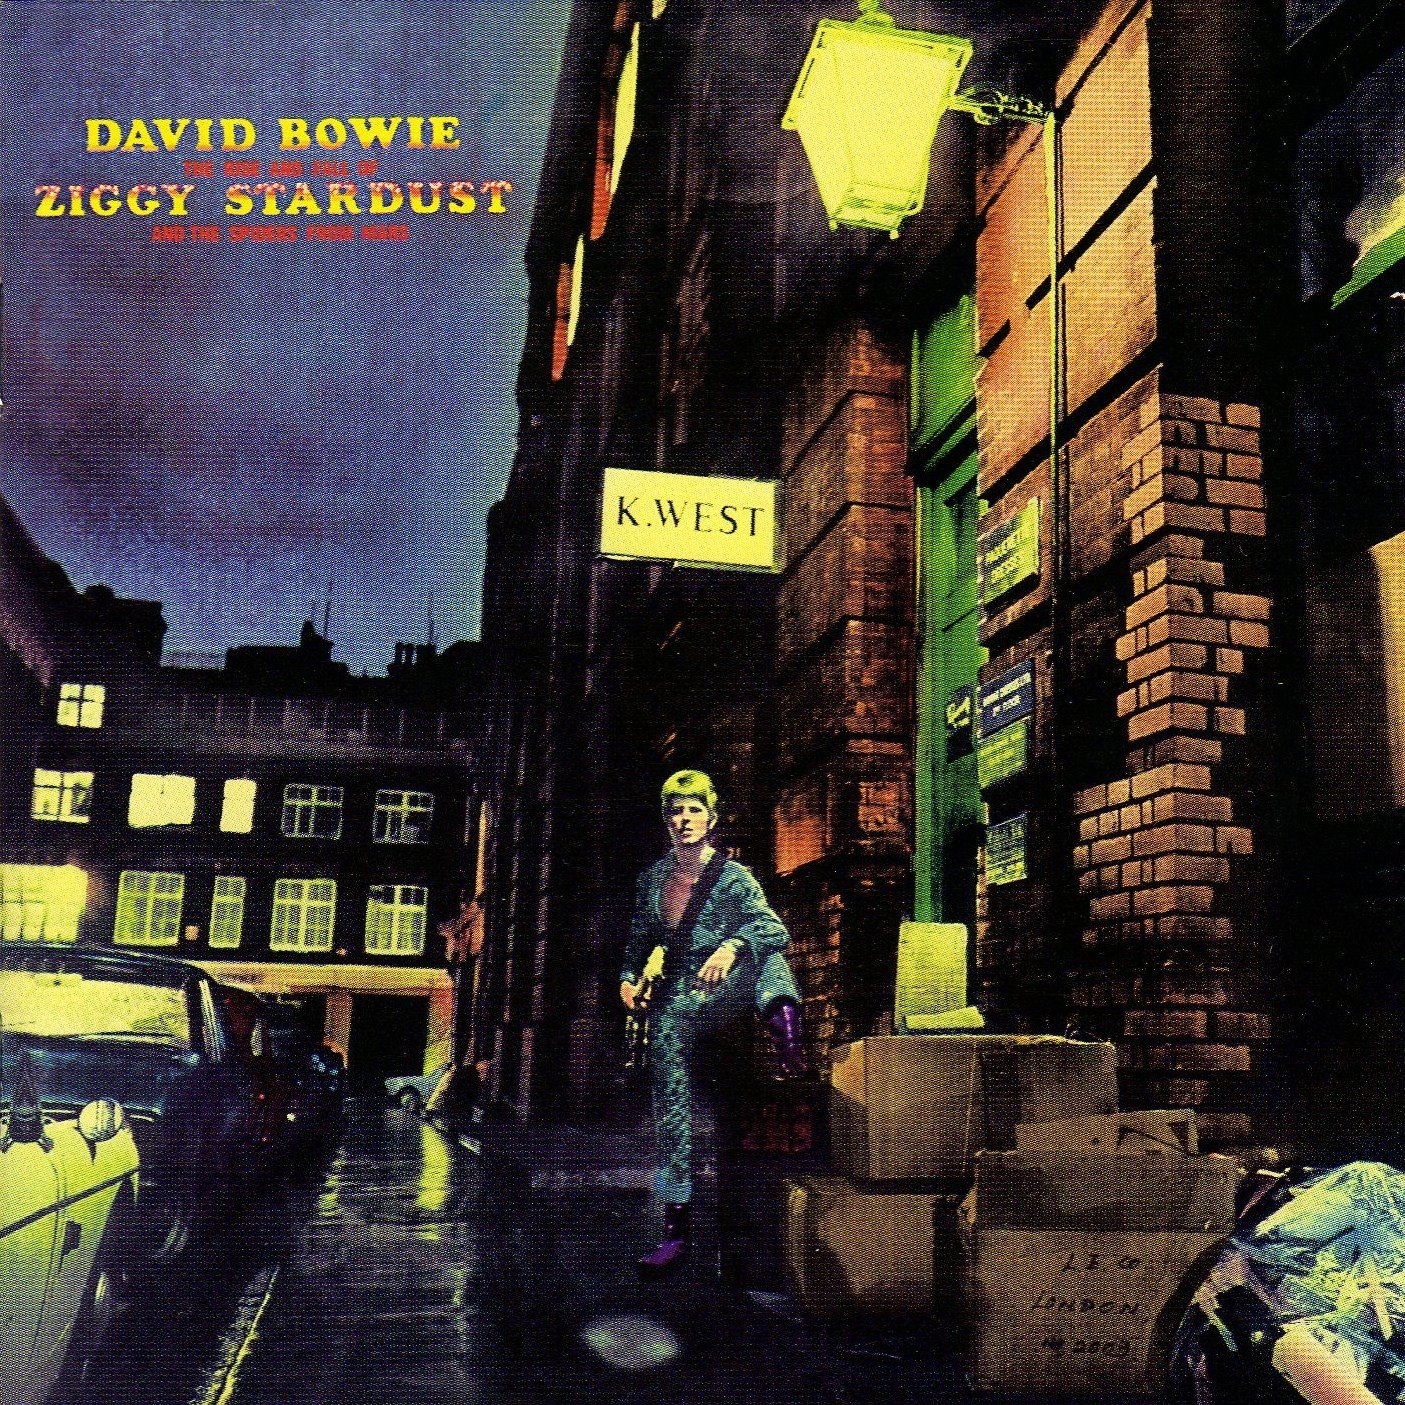 The rise and fall of Ziggy Stardust and the spiders from Mars (30th anniversary edition)